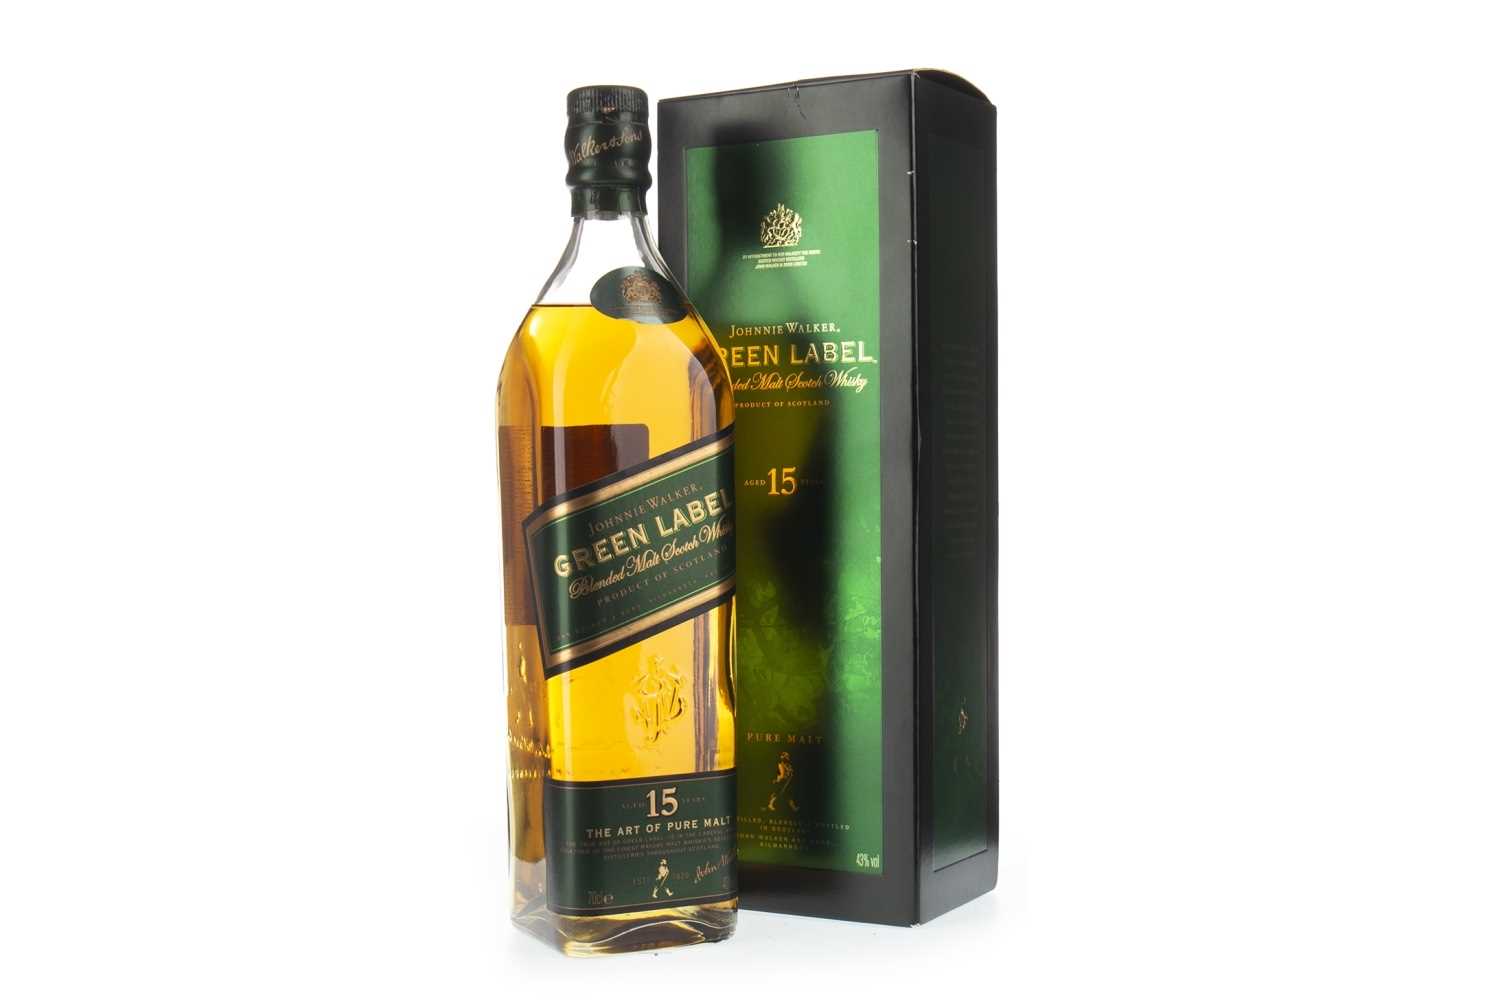 Lot 407 - JOHNNIE WALKER GREEN LABEL AGED 15 YEARS